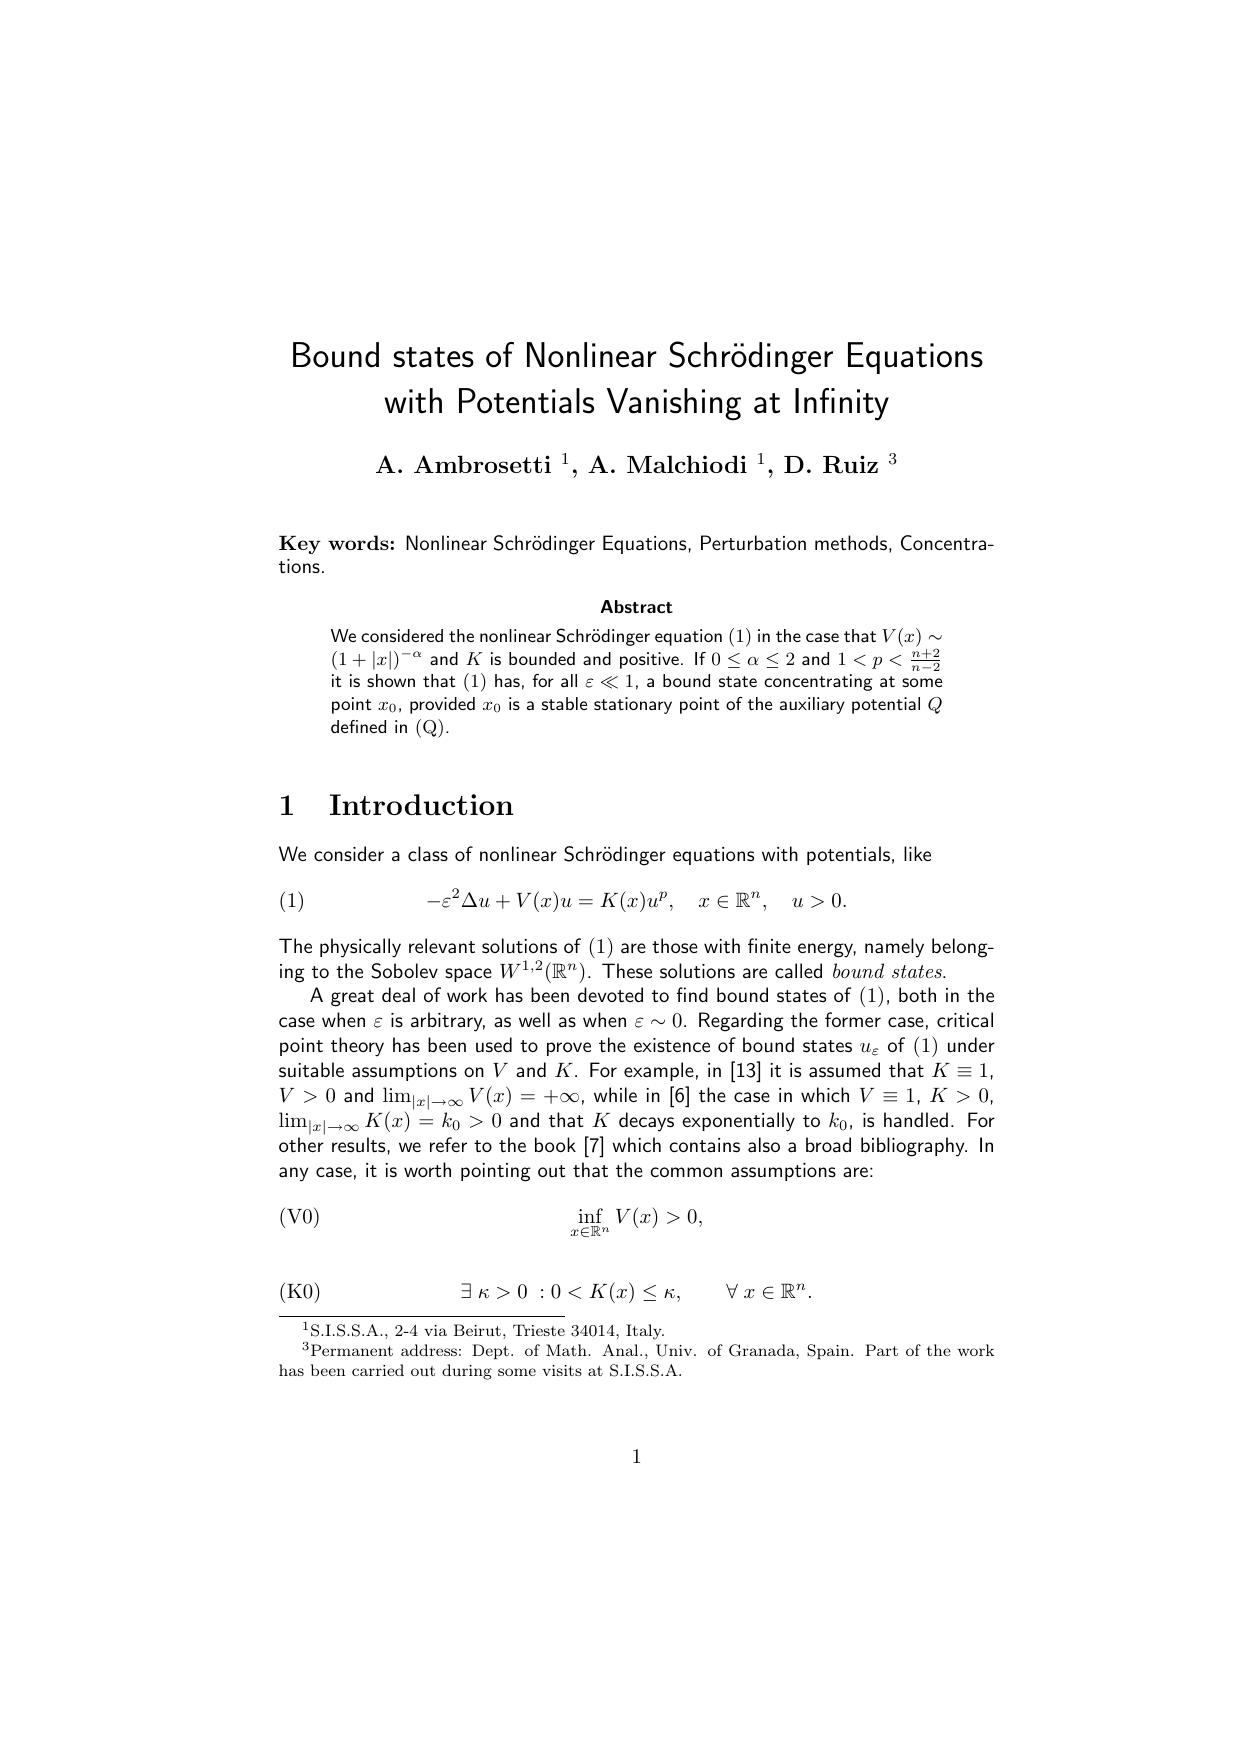 Bound states of nonlinear Schrodinger equations with potentials vanishing at infinity - Paper